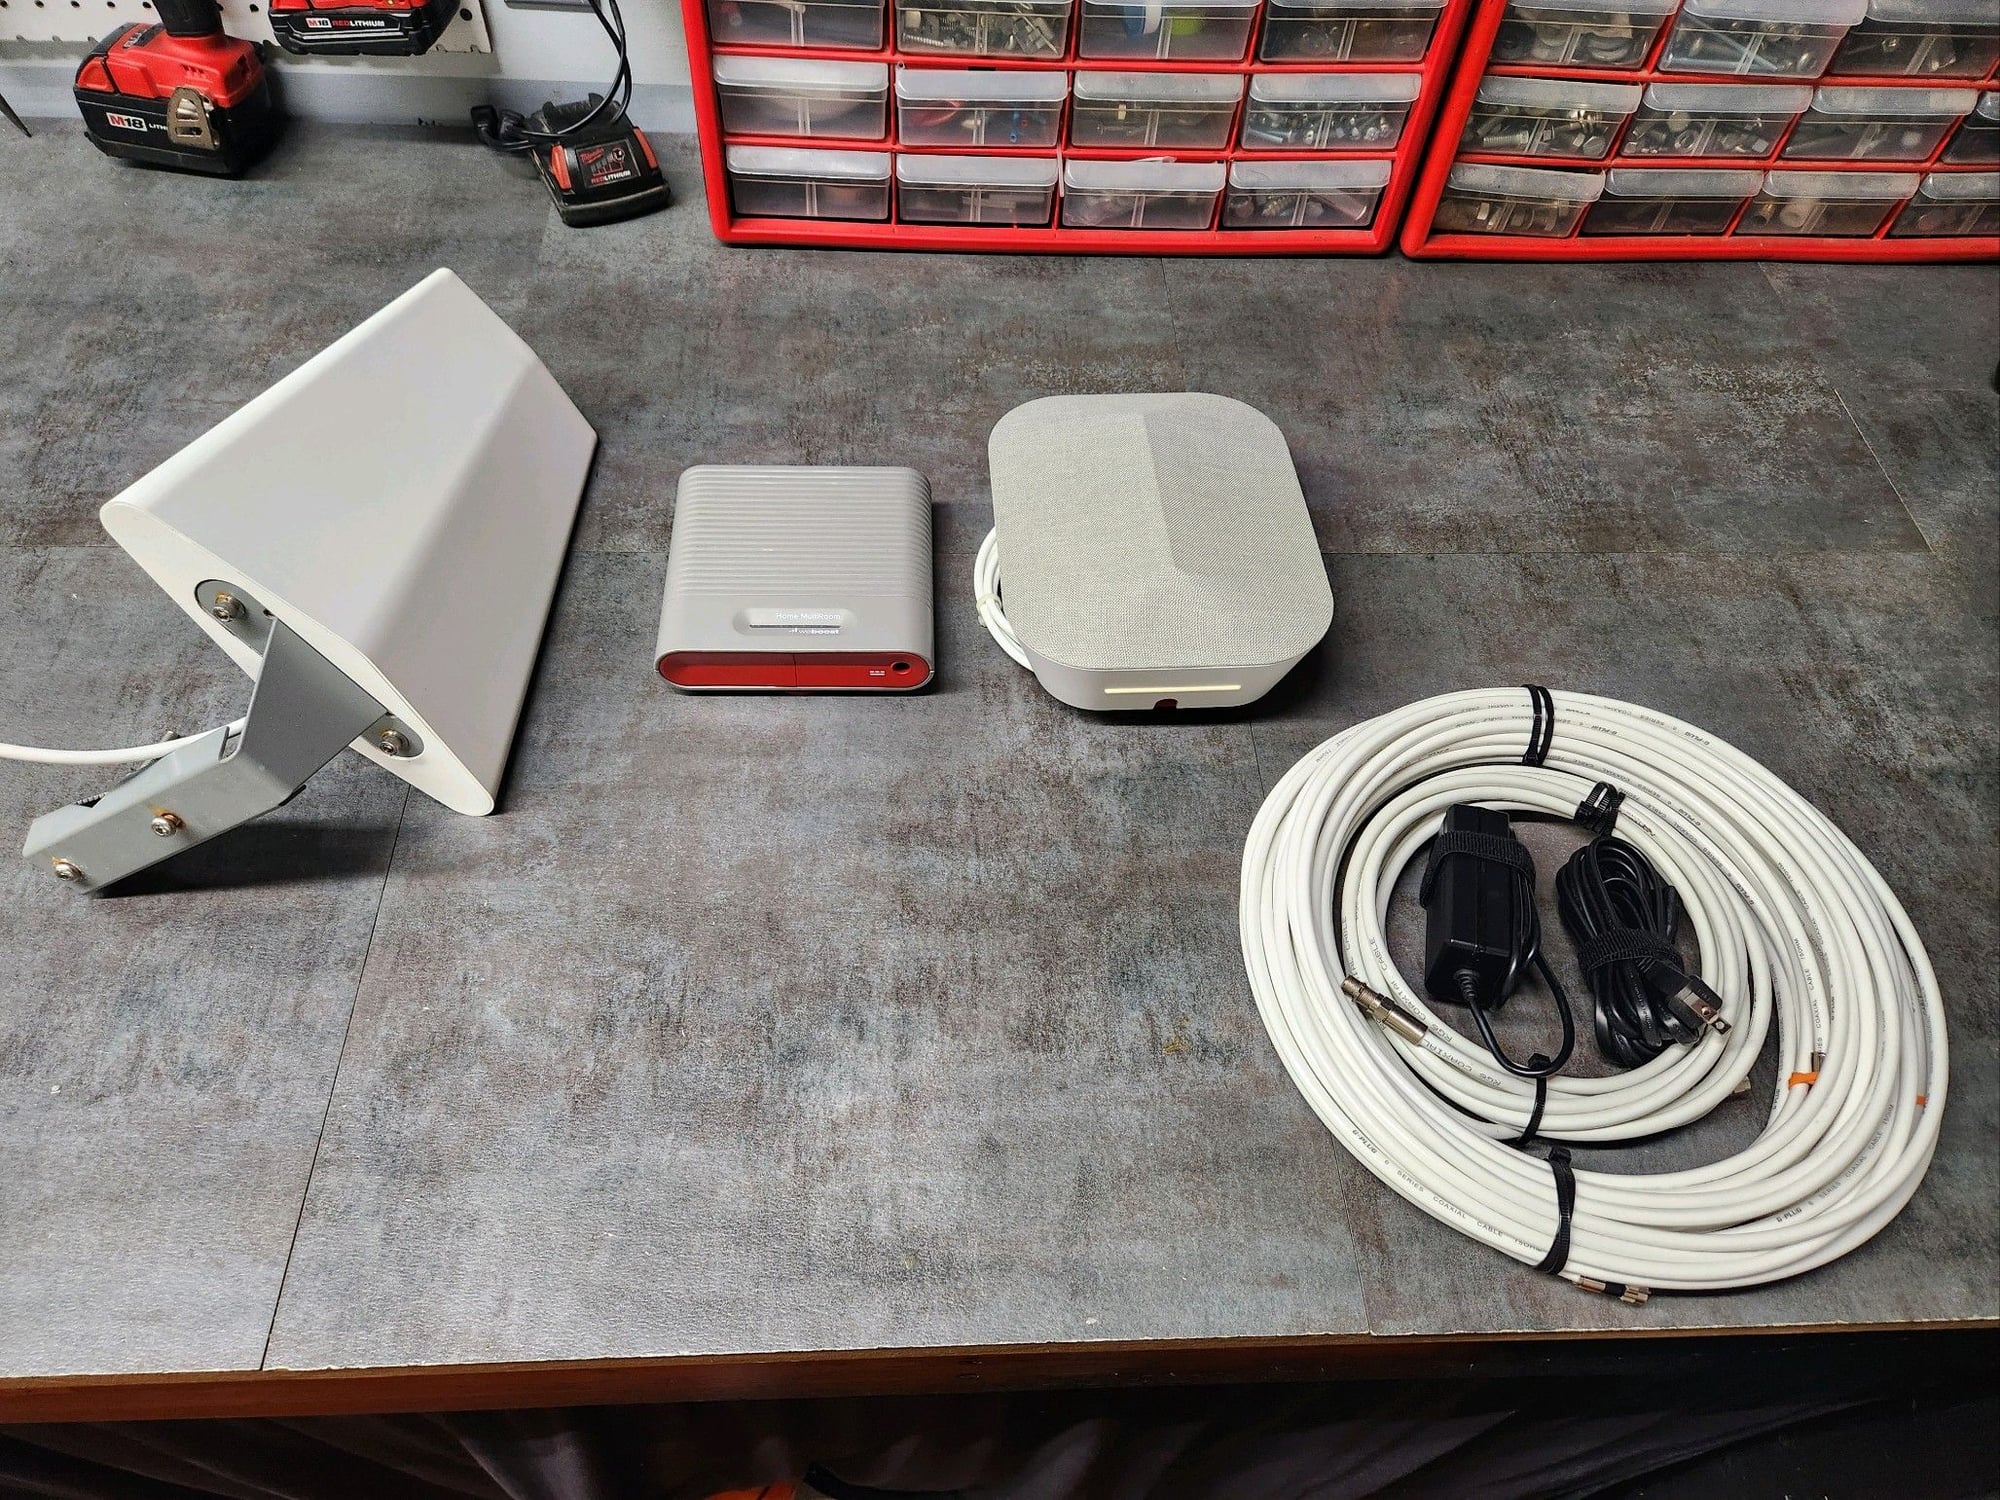 Audio Video/Electronics - FS: Cell phone signal booster for house - Used - 0  All Models - Berkeley Springs, WV 25411, United States